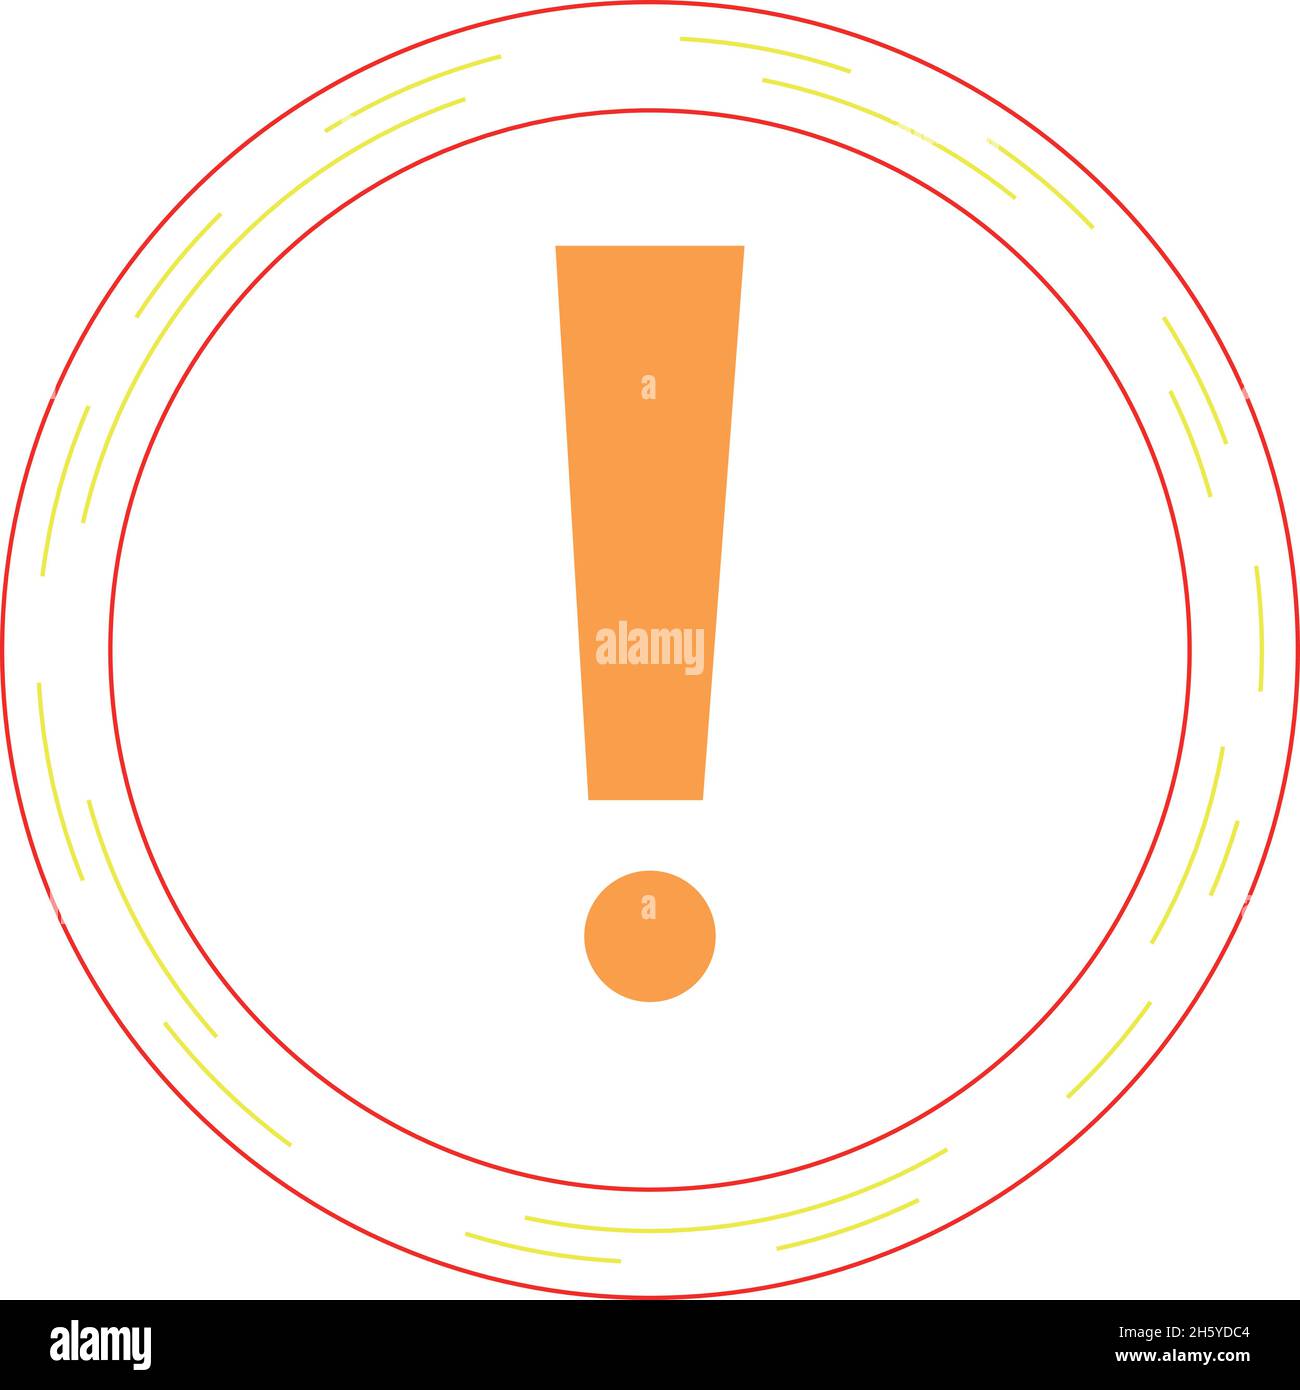 Exclamation mark in the circle. It can be used to alert risks or to focus attention. Stock Vector